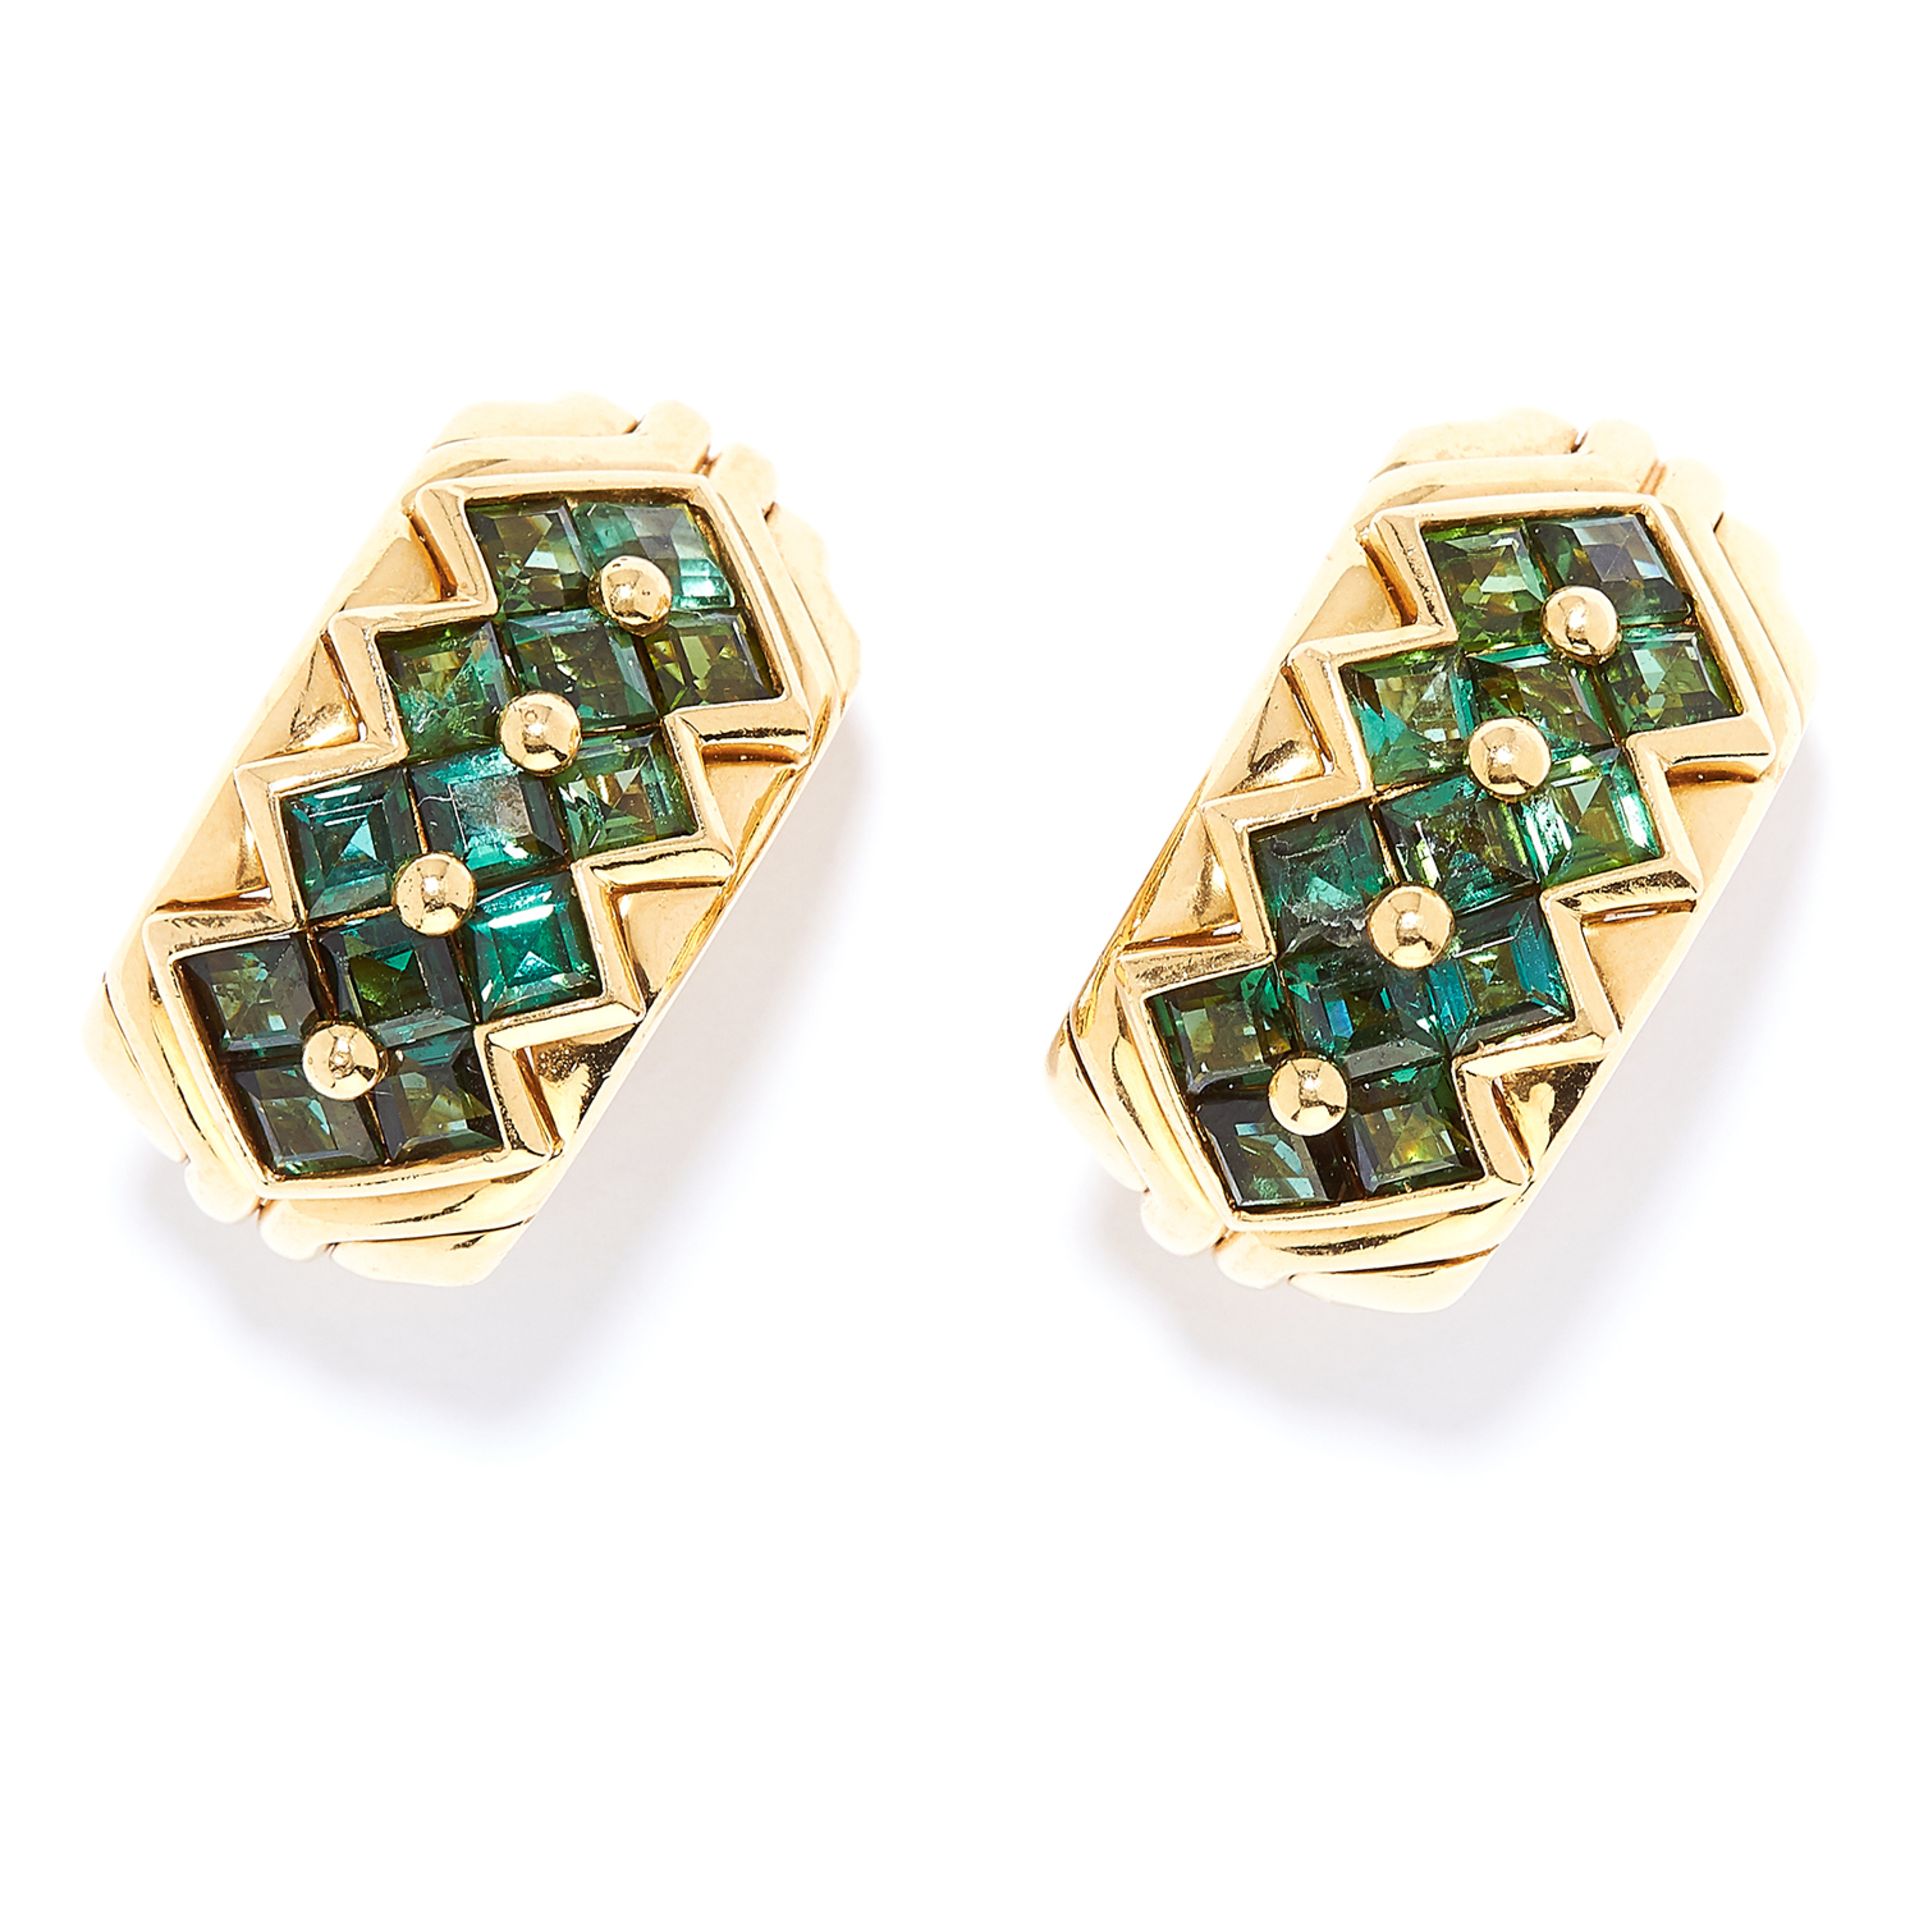 VINTAGE GREEN TOURMALINE EARRINGS, BULGARI in 18ct yellow gold, each set with square cut tourmalines